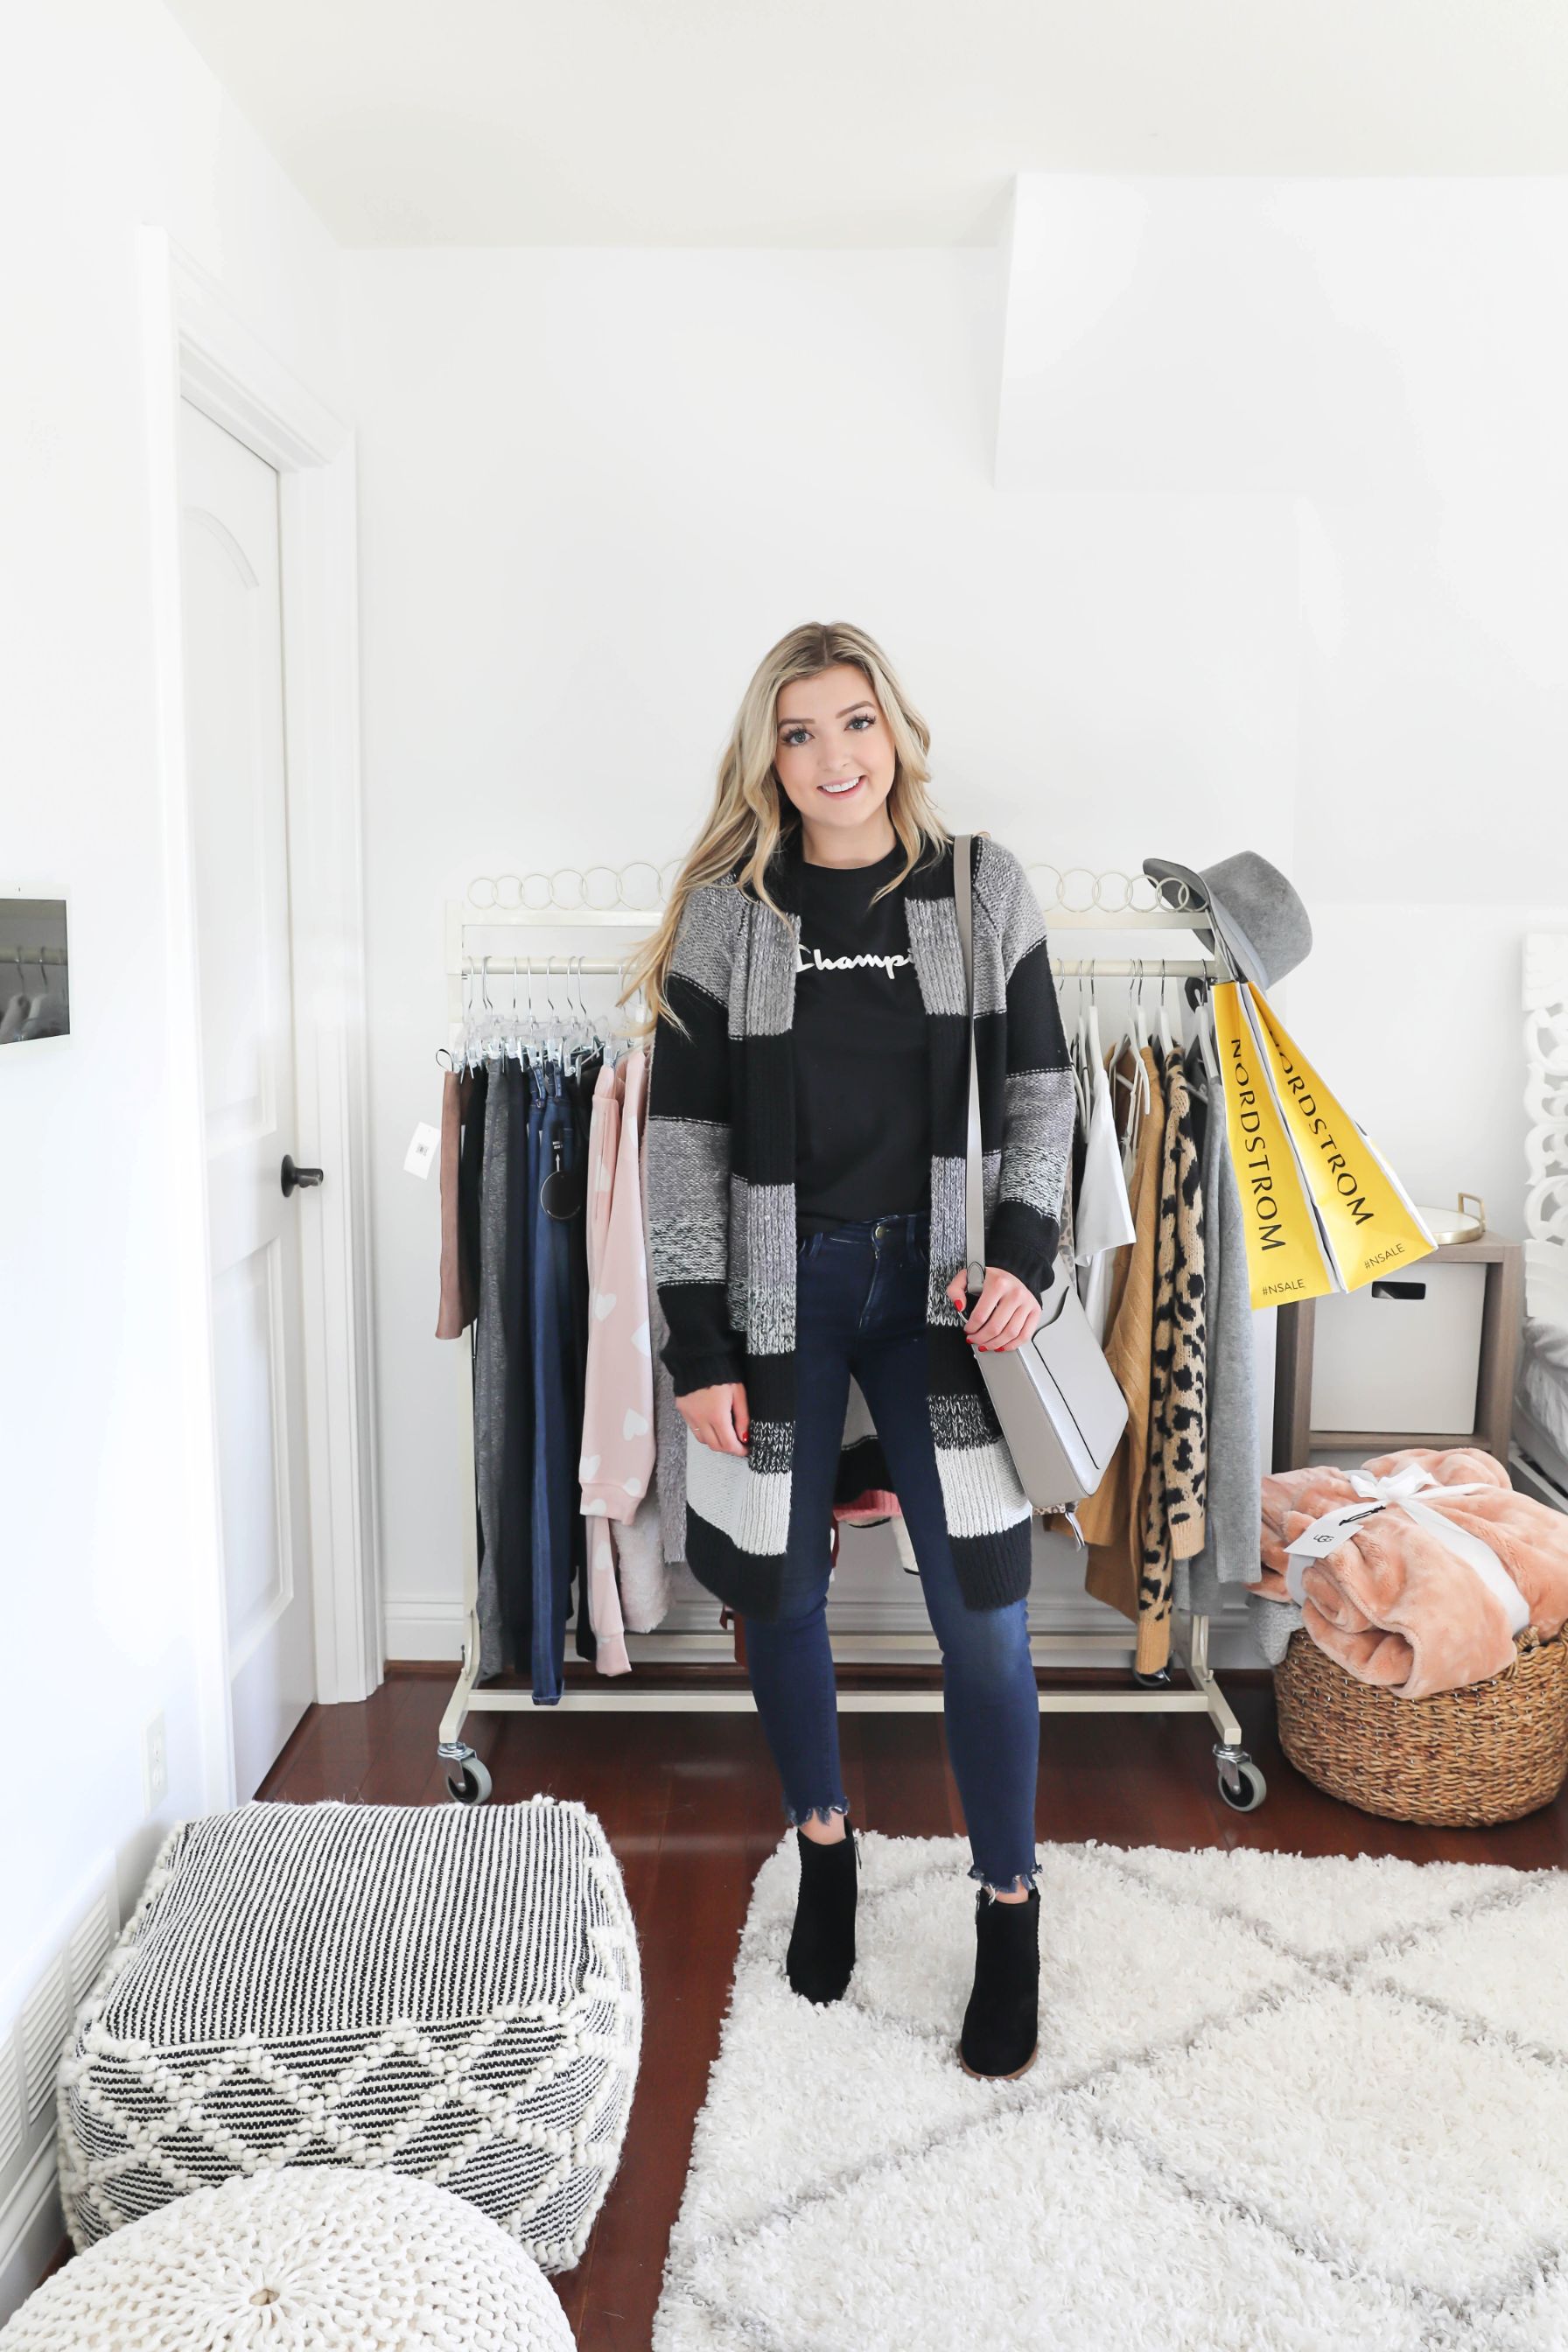 Nordstrom anniversary sale try on haul 2019 nsale sweaters pullovers shop with me vlog blogpost fashion blogger daily dose of charm lauren lindmark